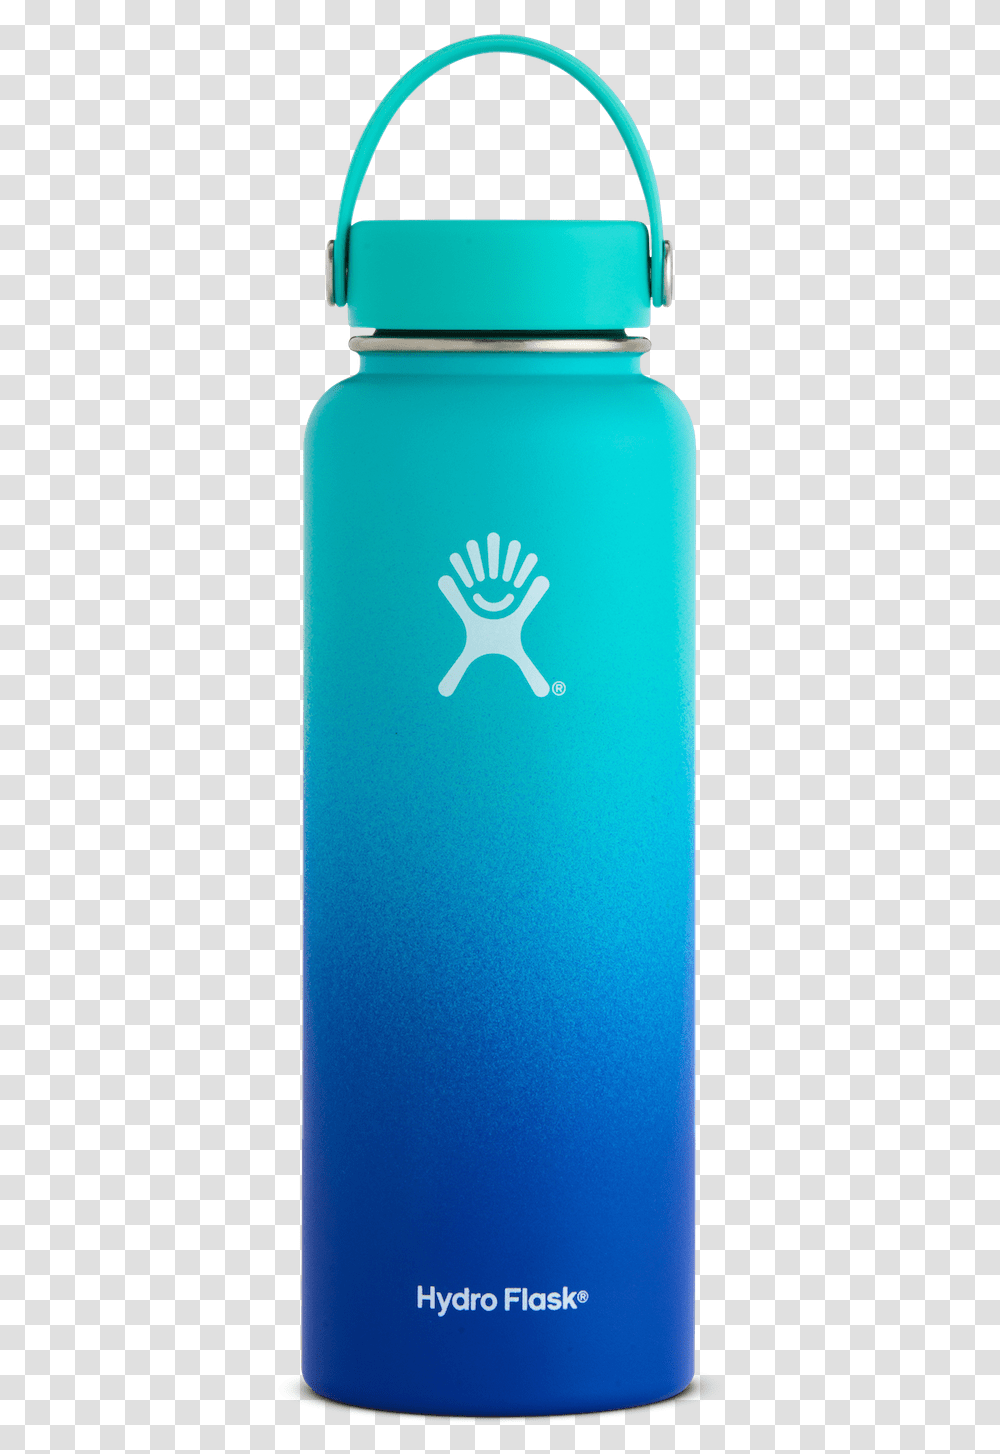 Hydro Flask Hydroflask Hawaii Collection Hydro Flask Hydro Flask Blue Ombre, Mobile Phone, Electronics, Cell Phone Transparent Png